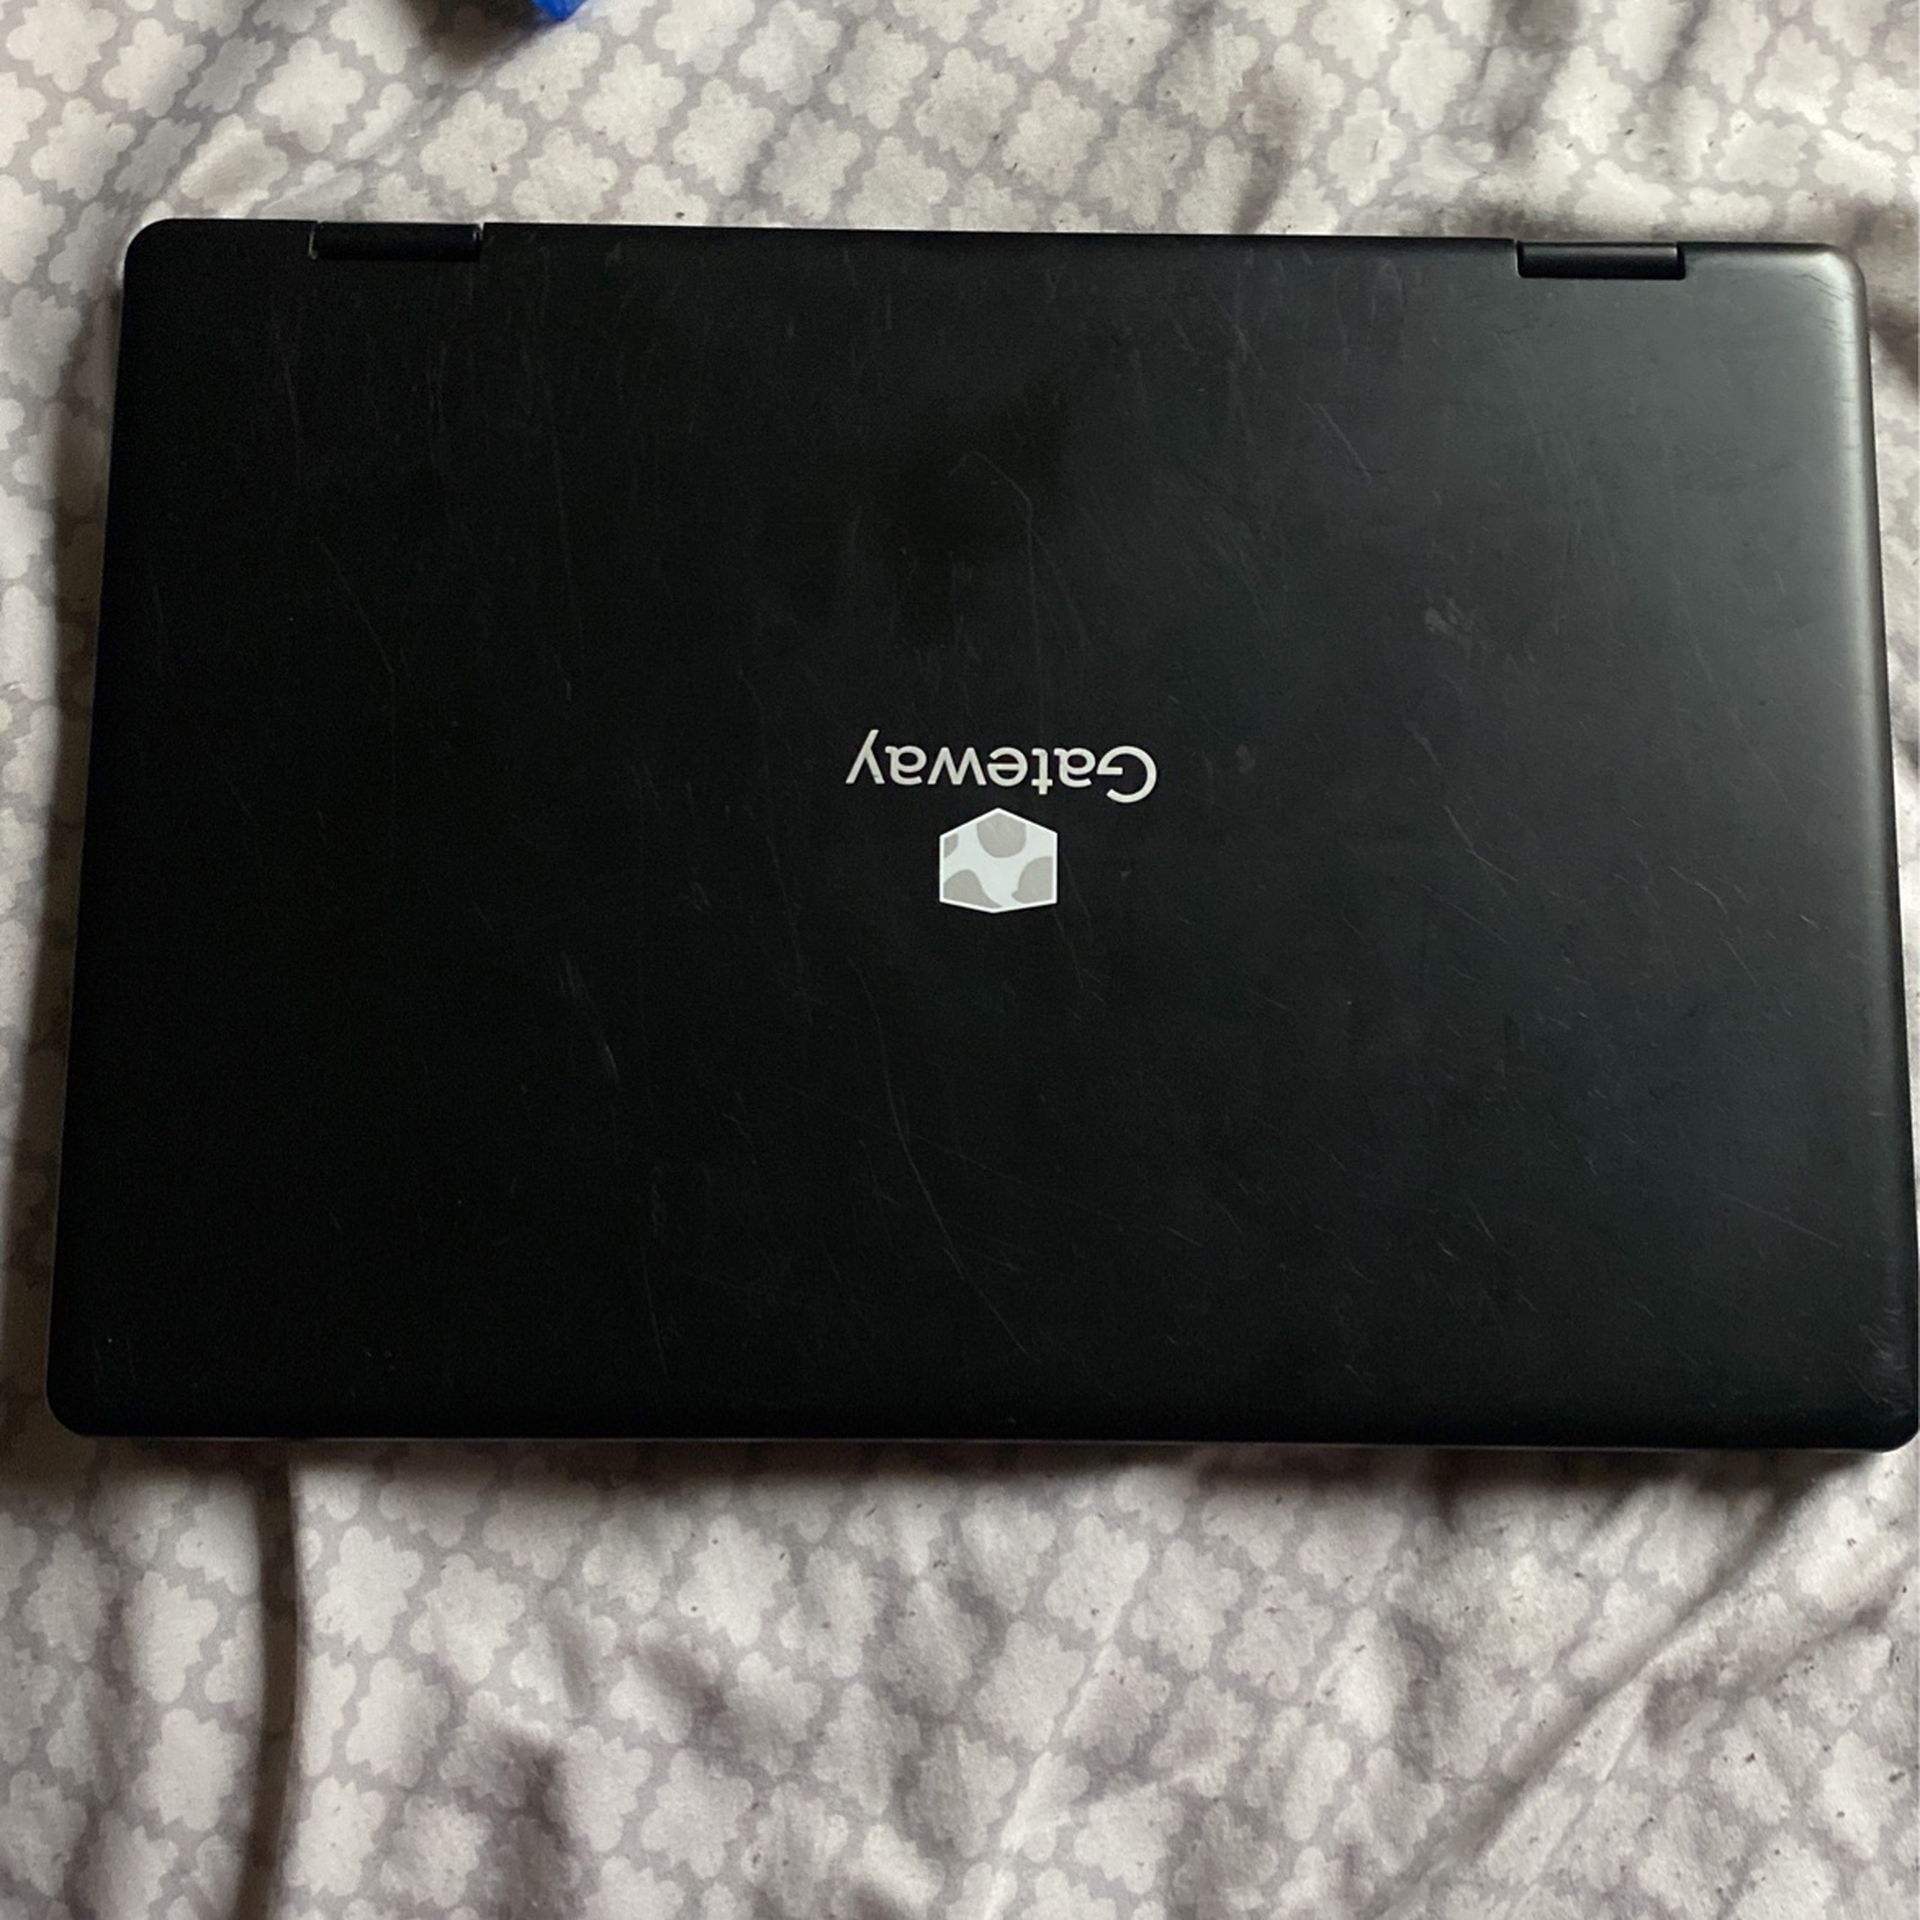 Laptops For Sale